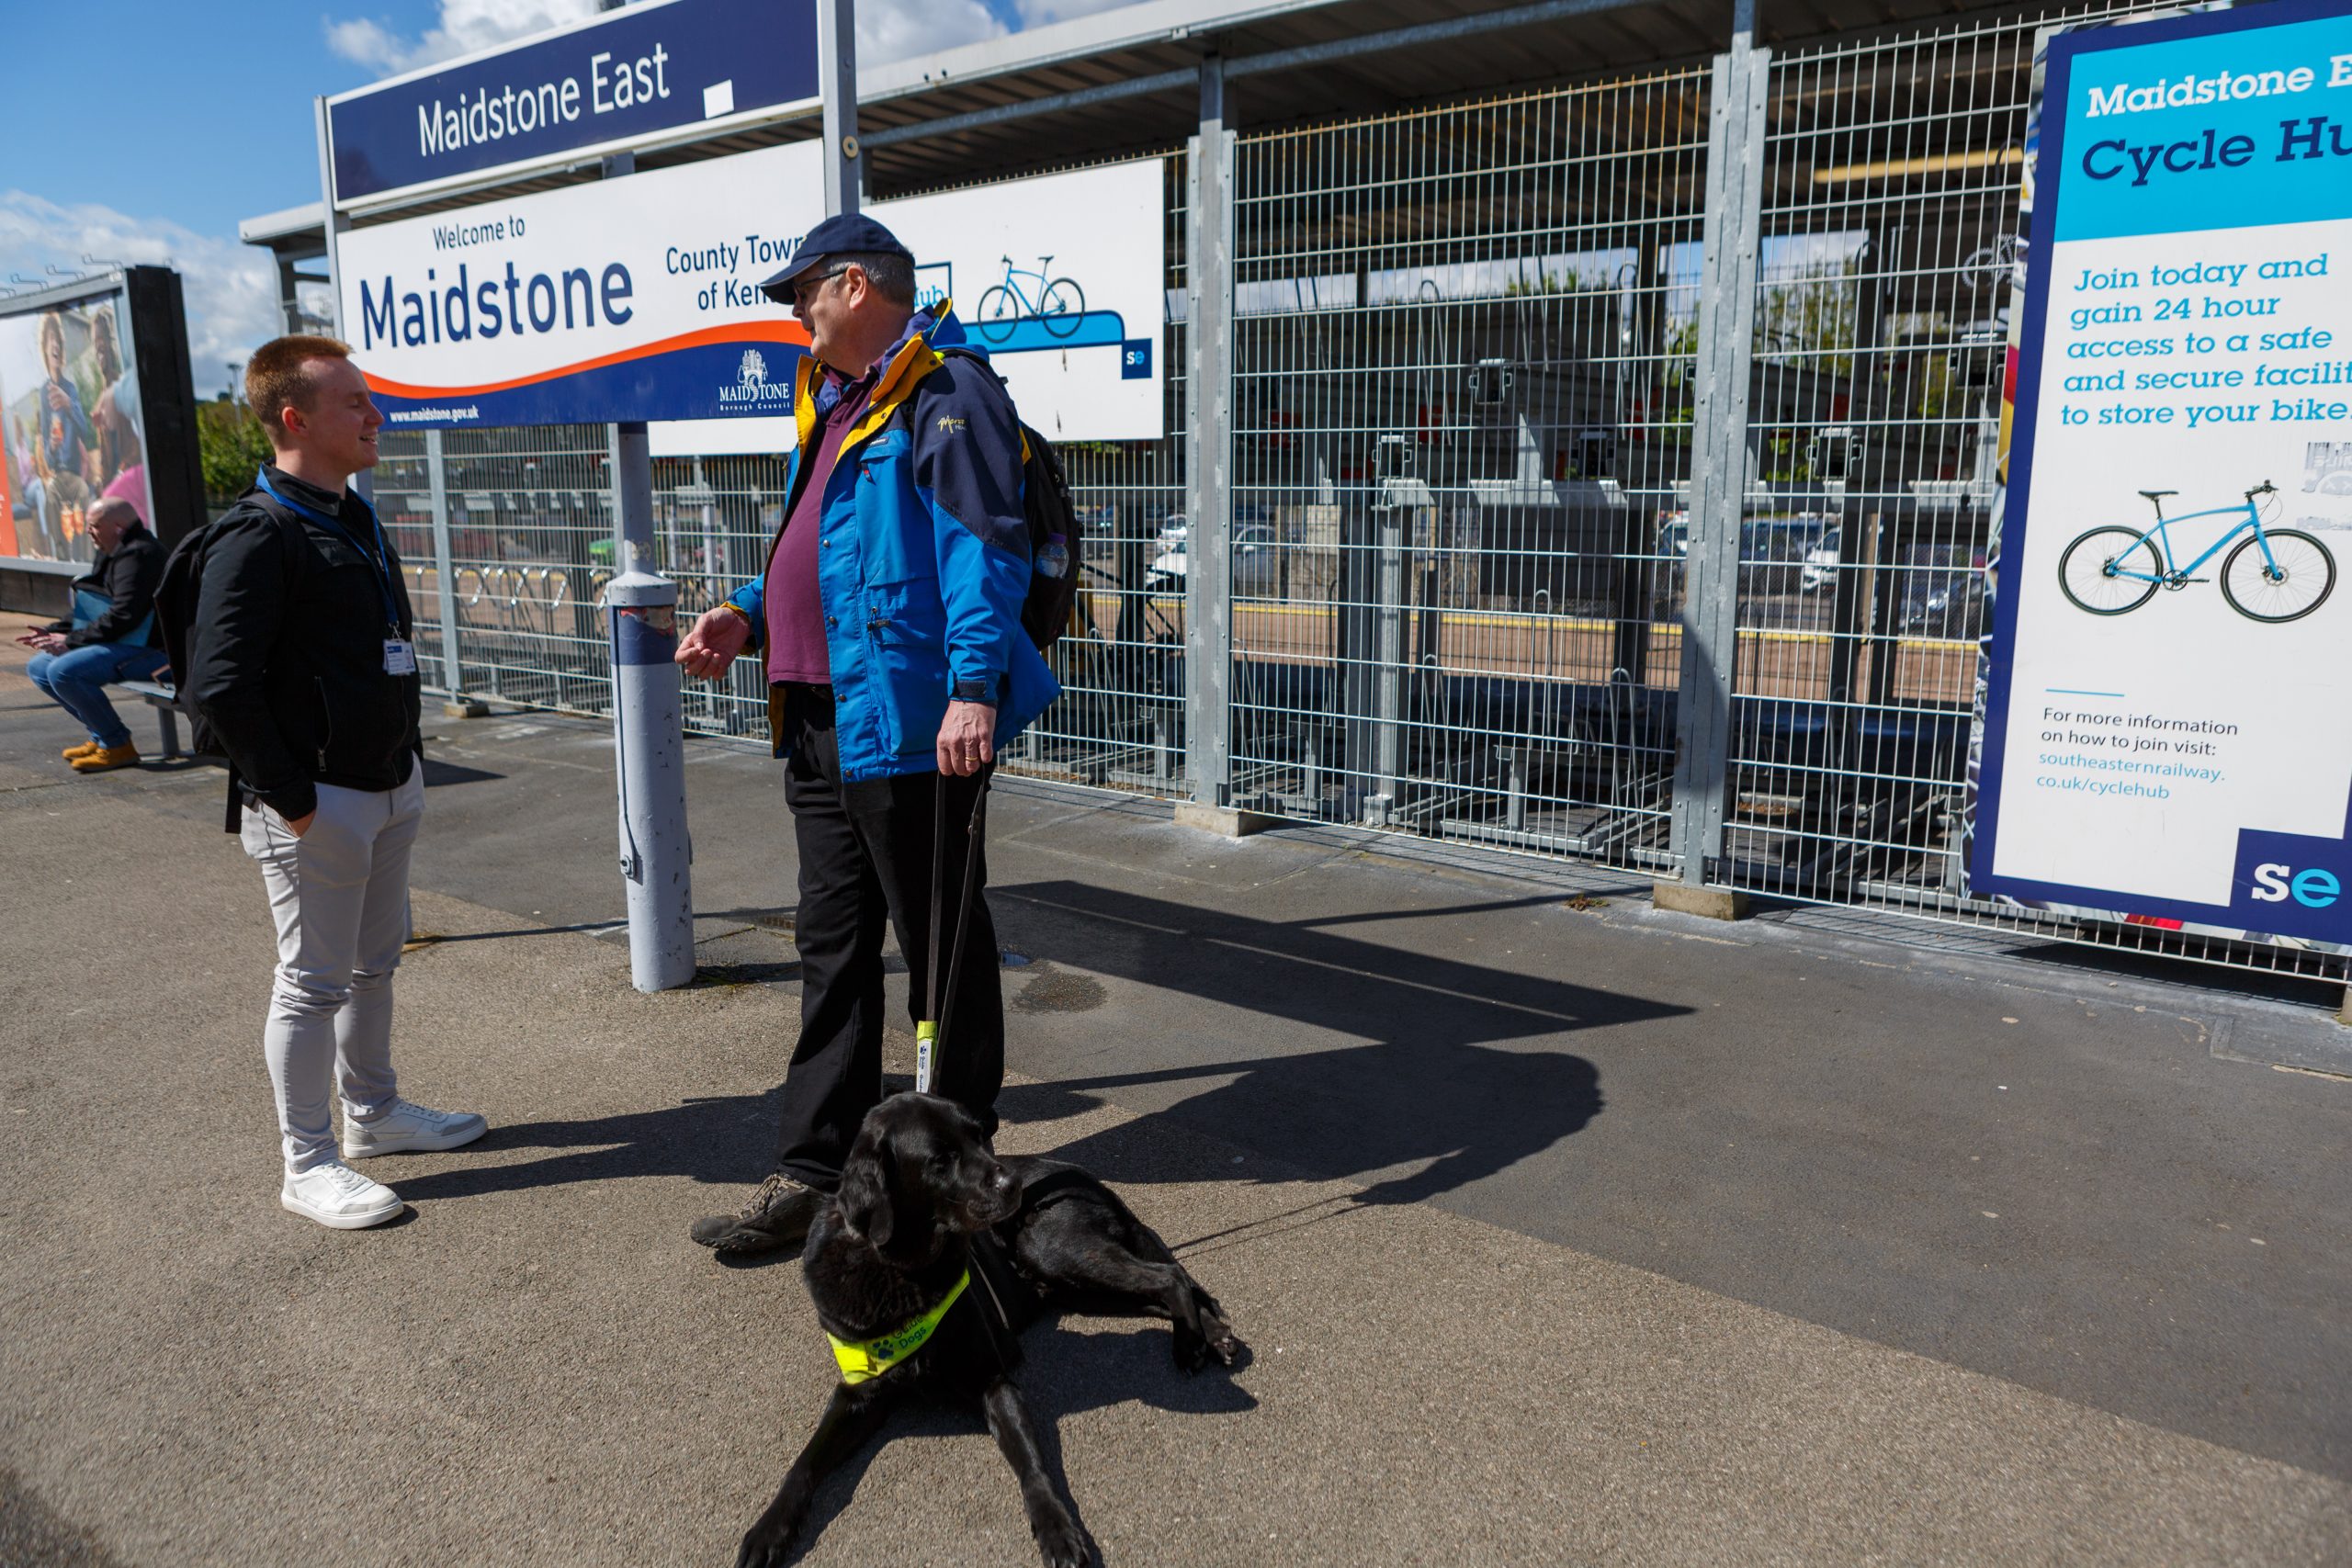 A guide dog owner and their guide dog chatting on the platform. Behind them is a secure cycle hub.